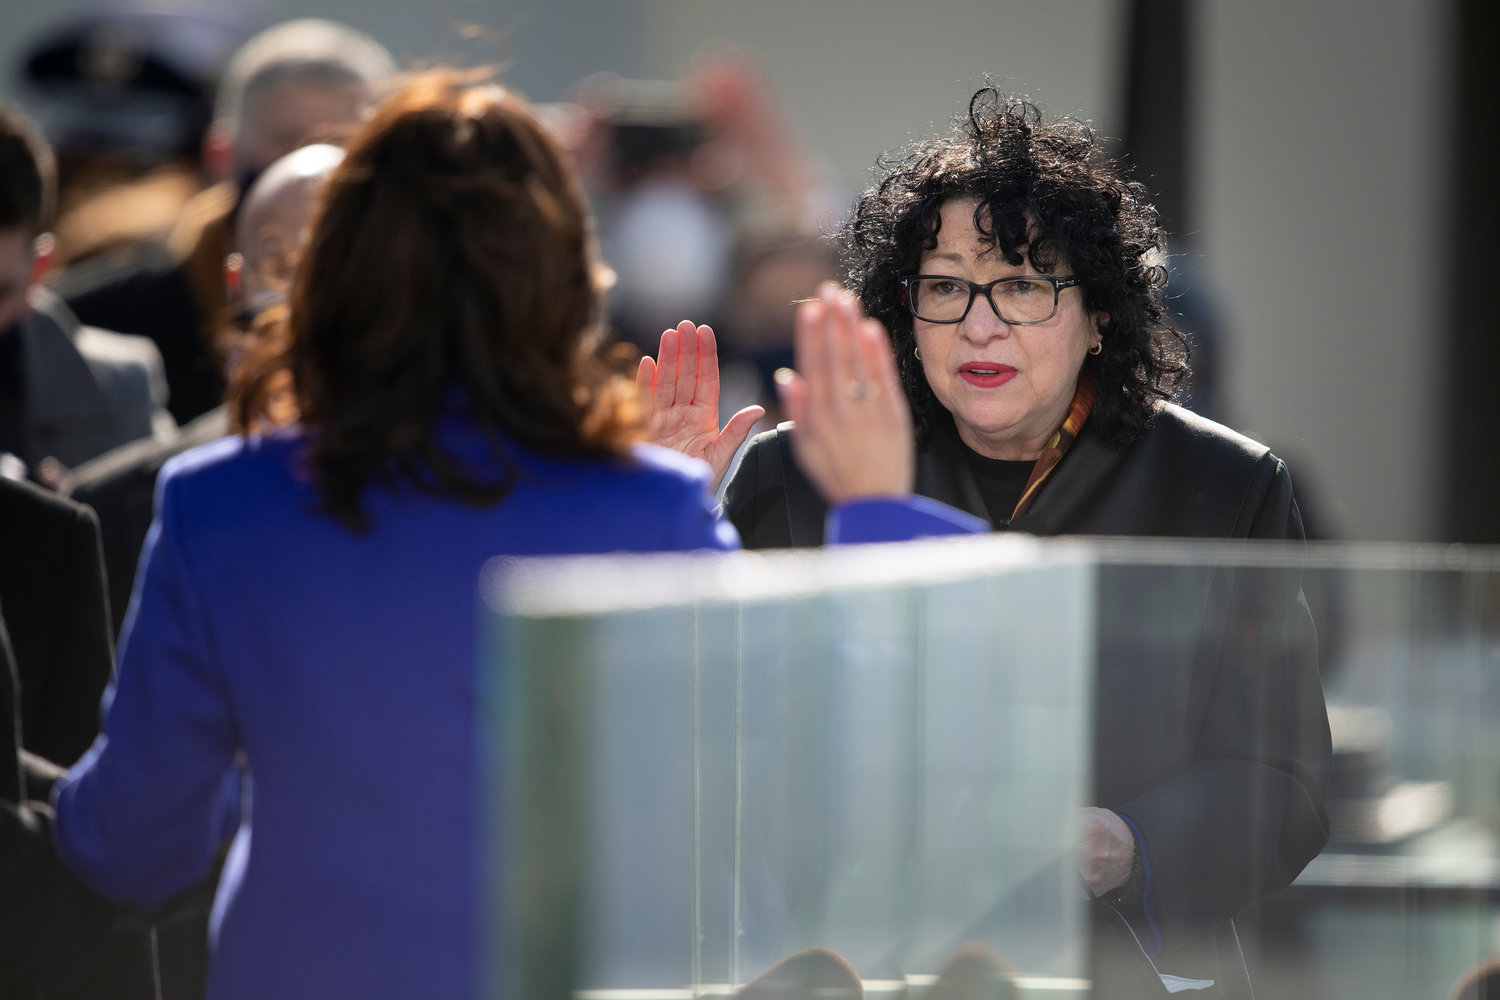 Supreme Court Justice Sonia Sotomayor swears in Vice President Kamala Harris into office during the 59th Presidential Inauguration ceremony in Washington, Jan. 20, 2021. President Joe Biden and Vice President Kamala Harris took the oath of office on the West Front of the U.S. Capitol.